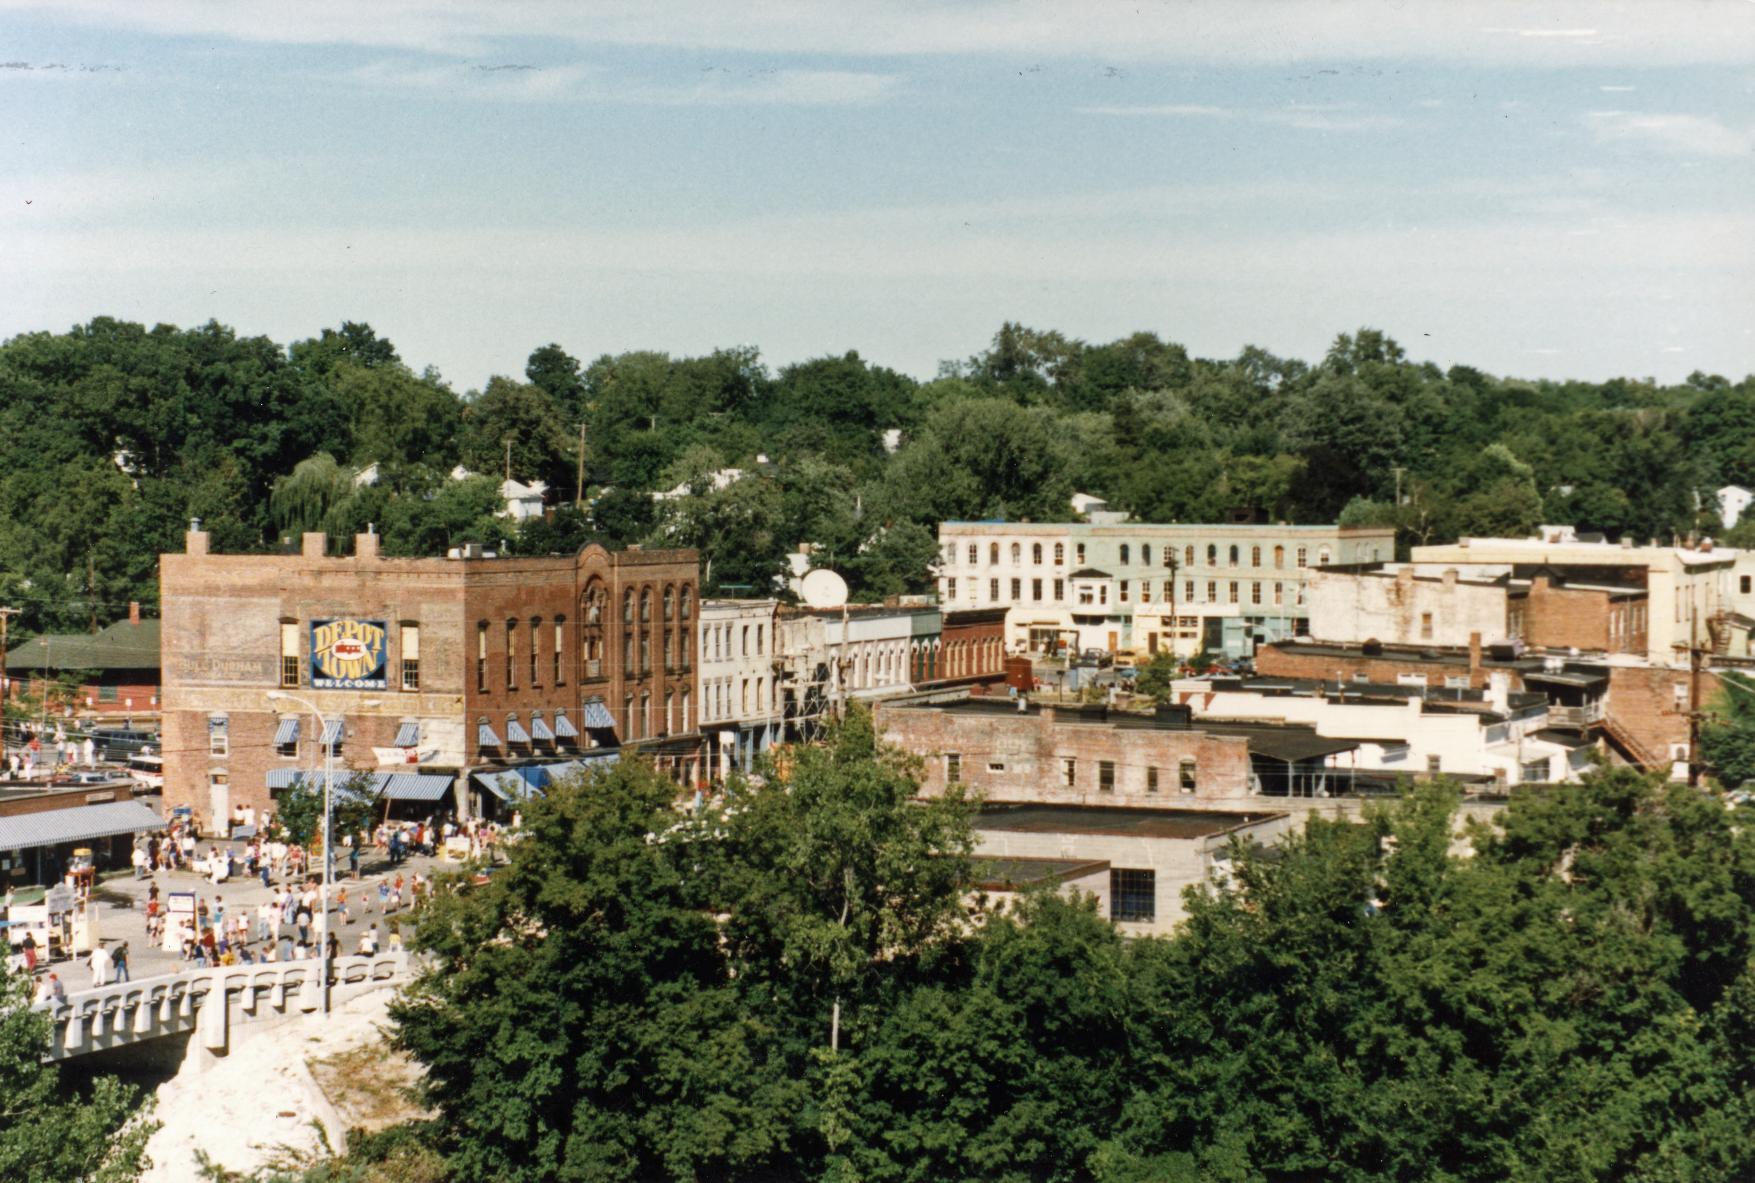 A distance photograph looking east at the Depot Town Festival during the summer of 1986.